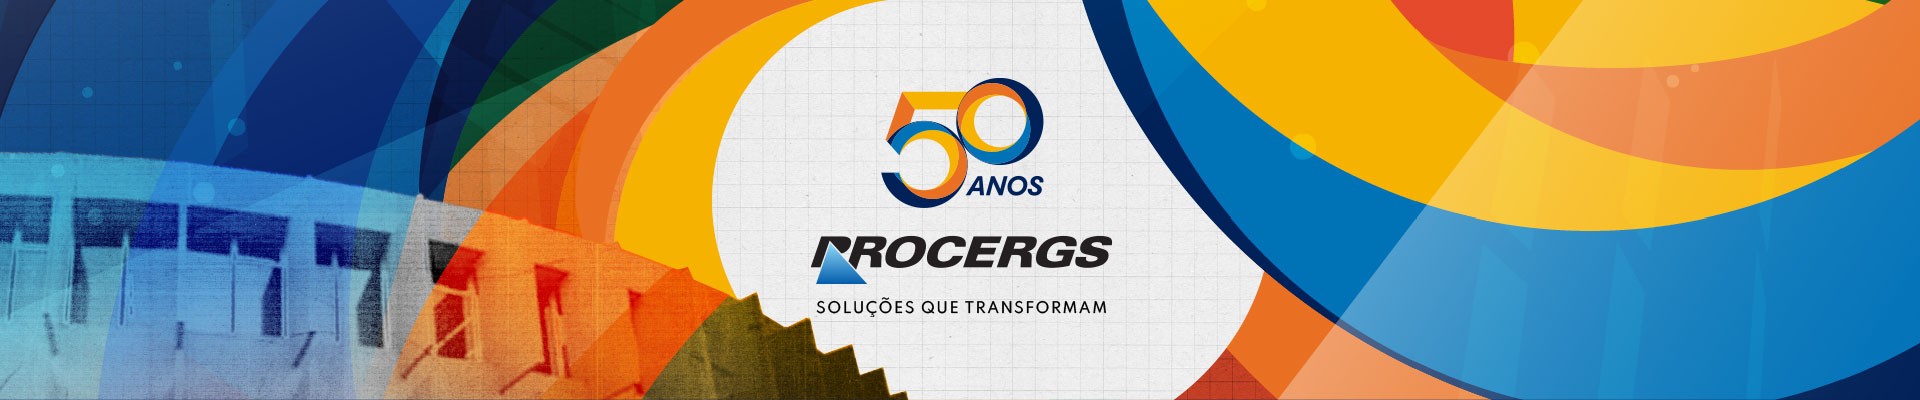 Banner Procergs - 50 anos